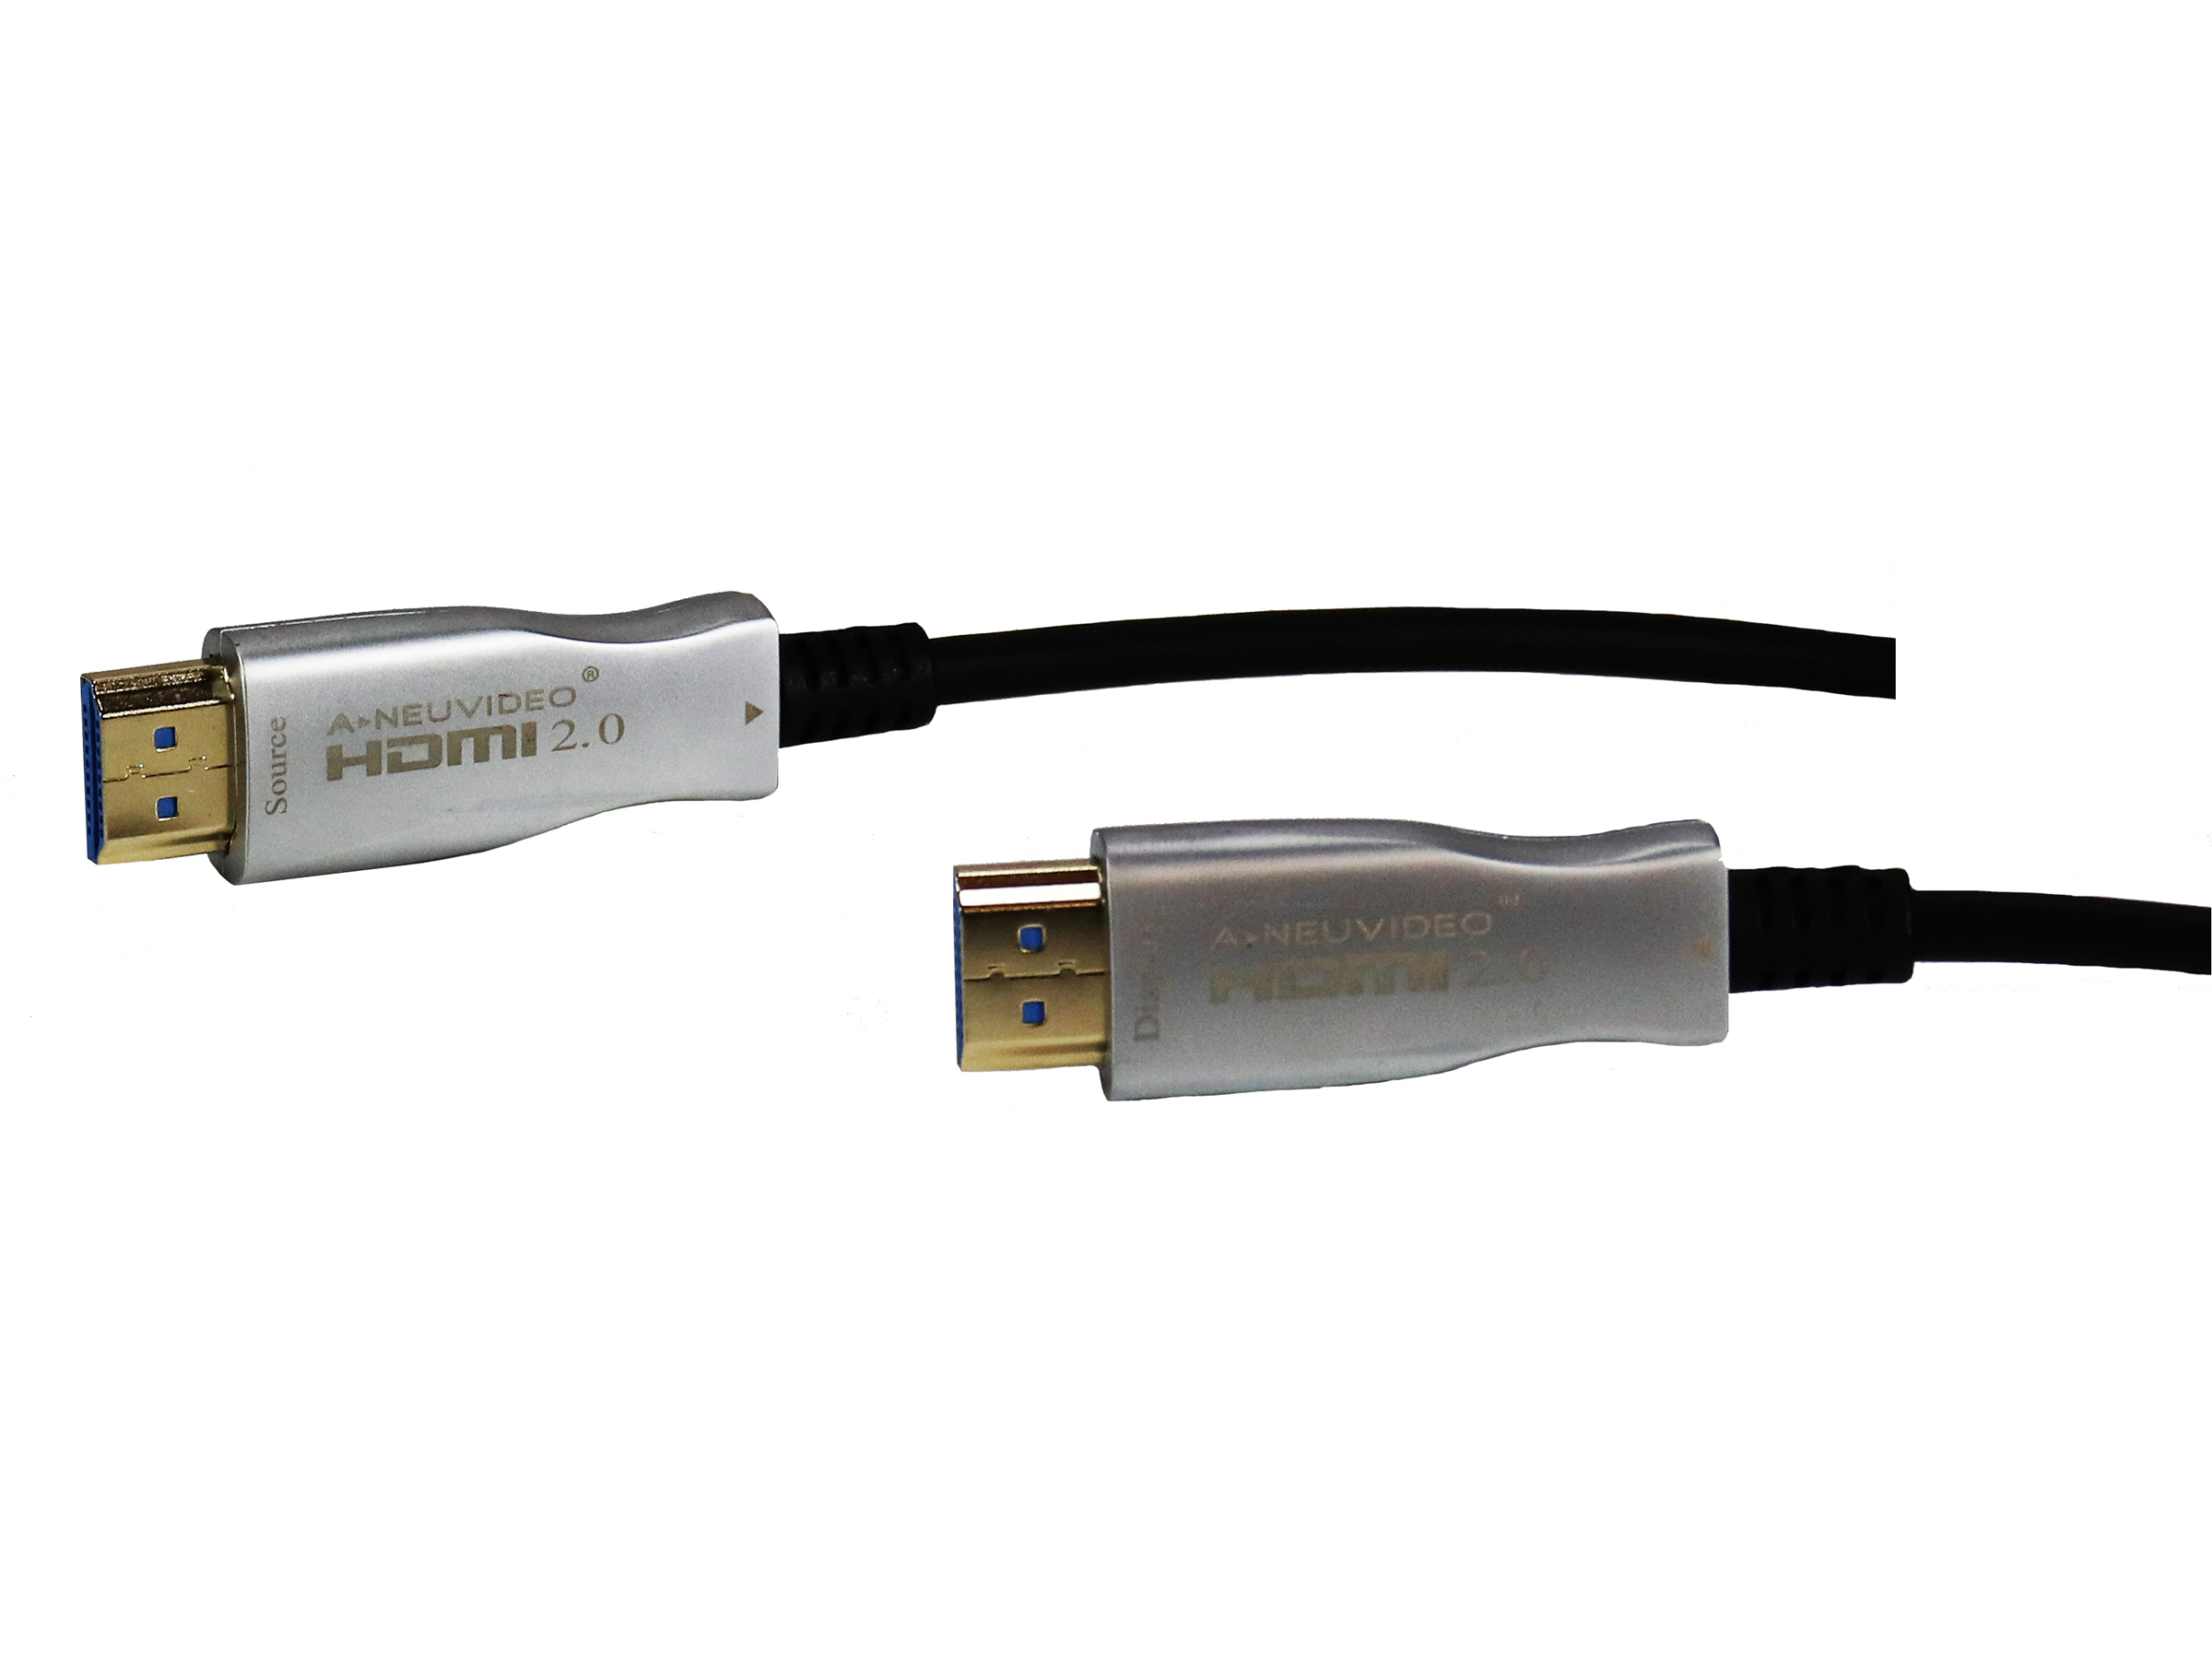 ANI-AOC-100 Fiber Optic Hdmi Active Optical Cable - 100m/328ft by A-NeuVideo